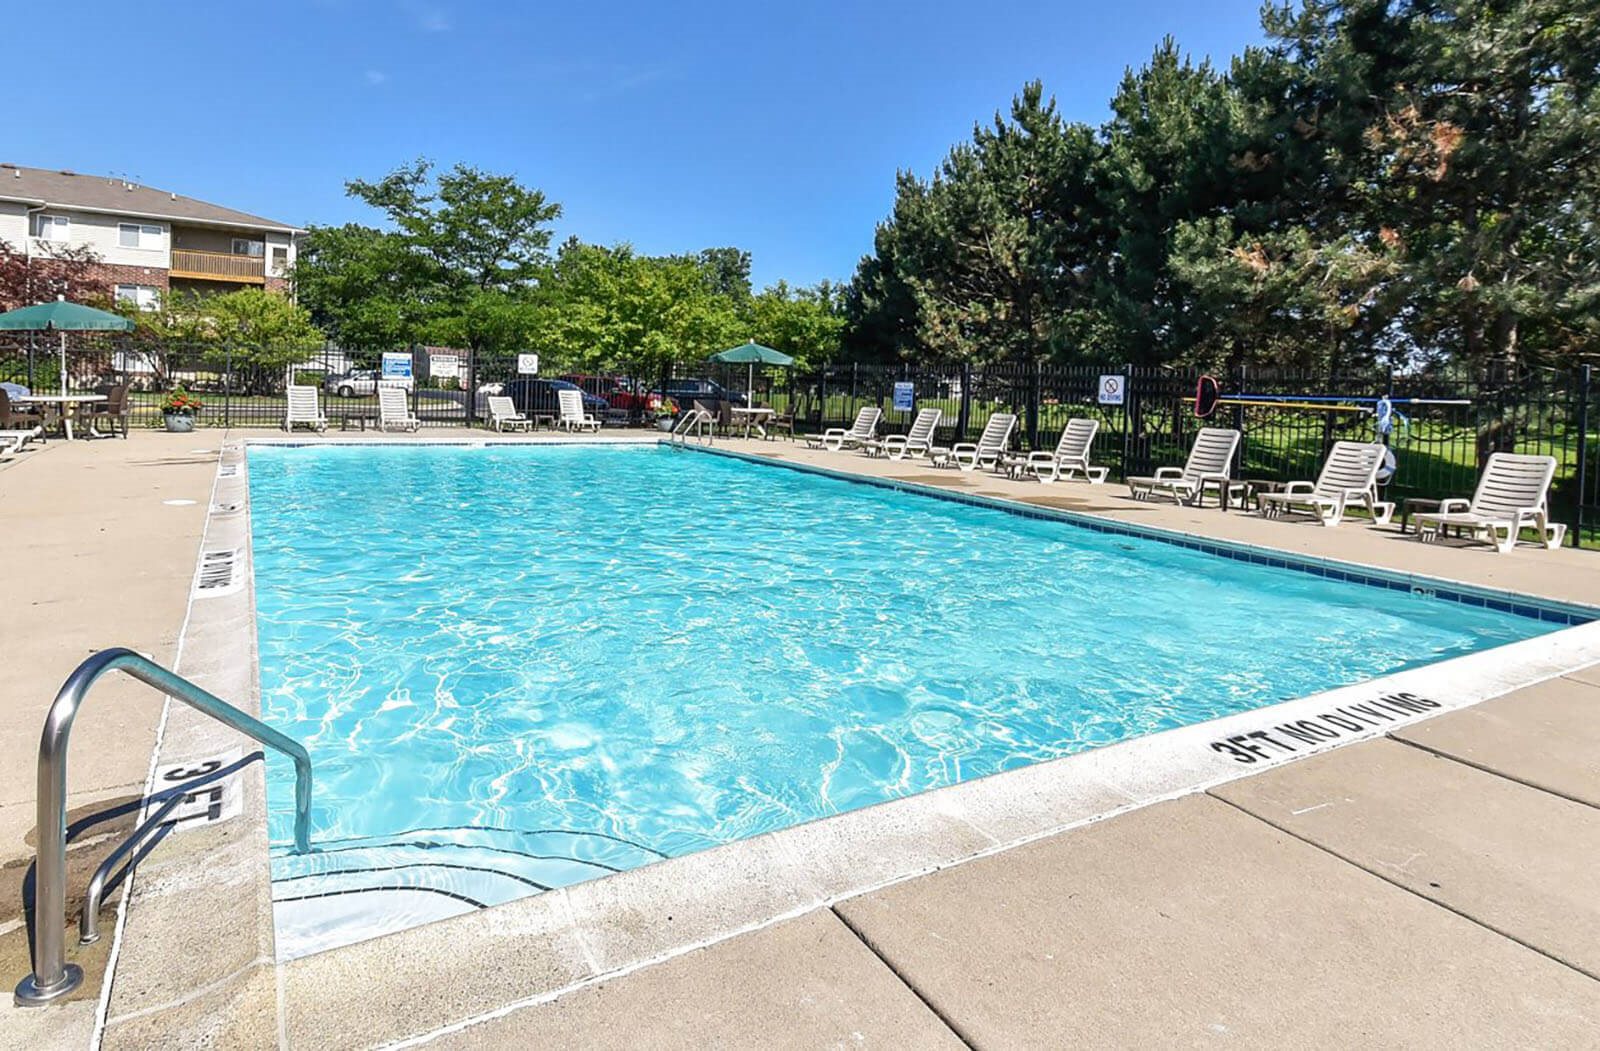 Northgate Apartments in Waukegan, IL